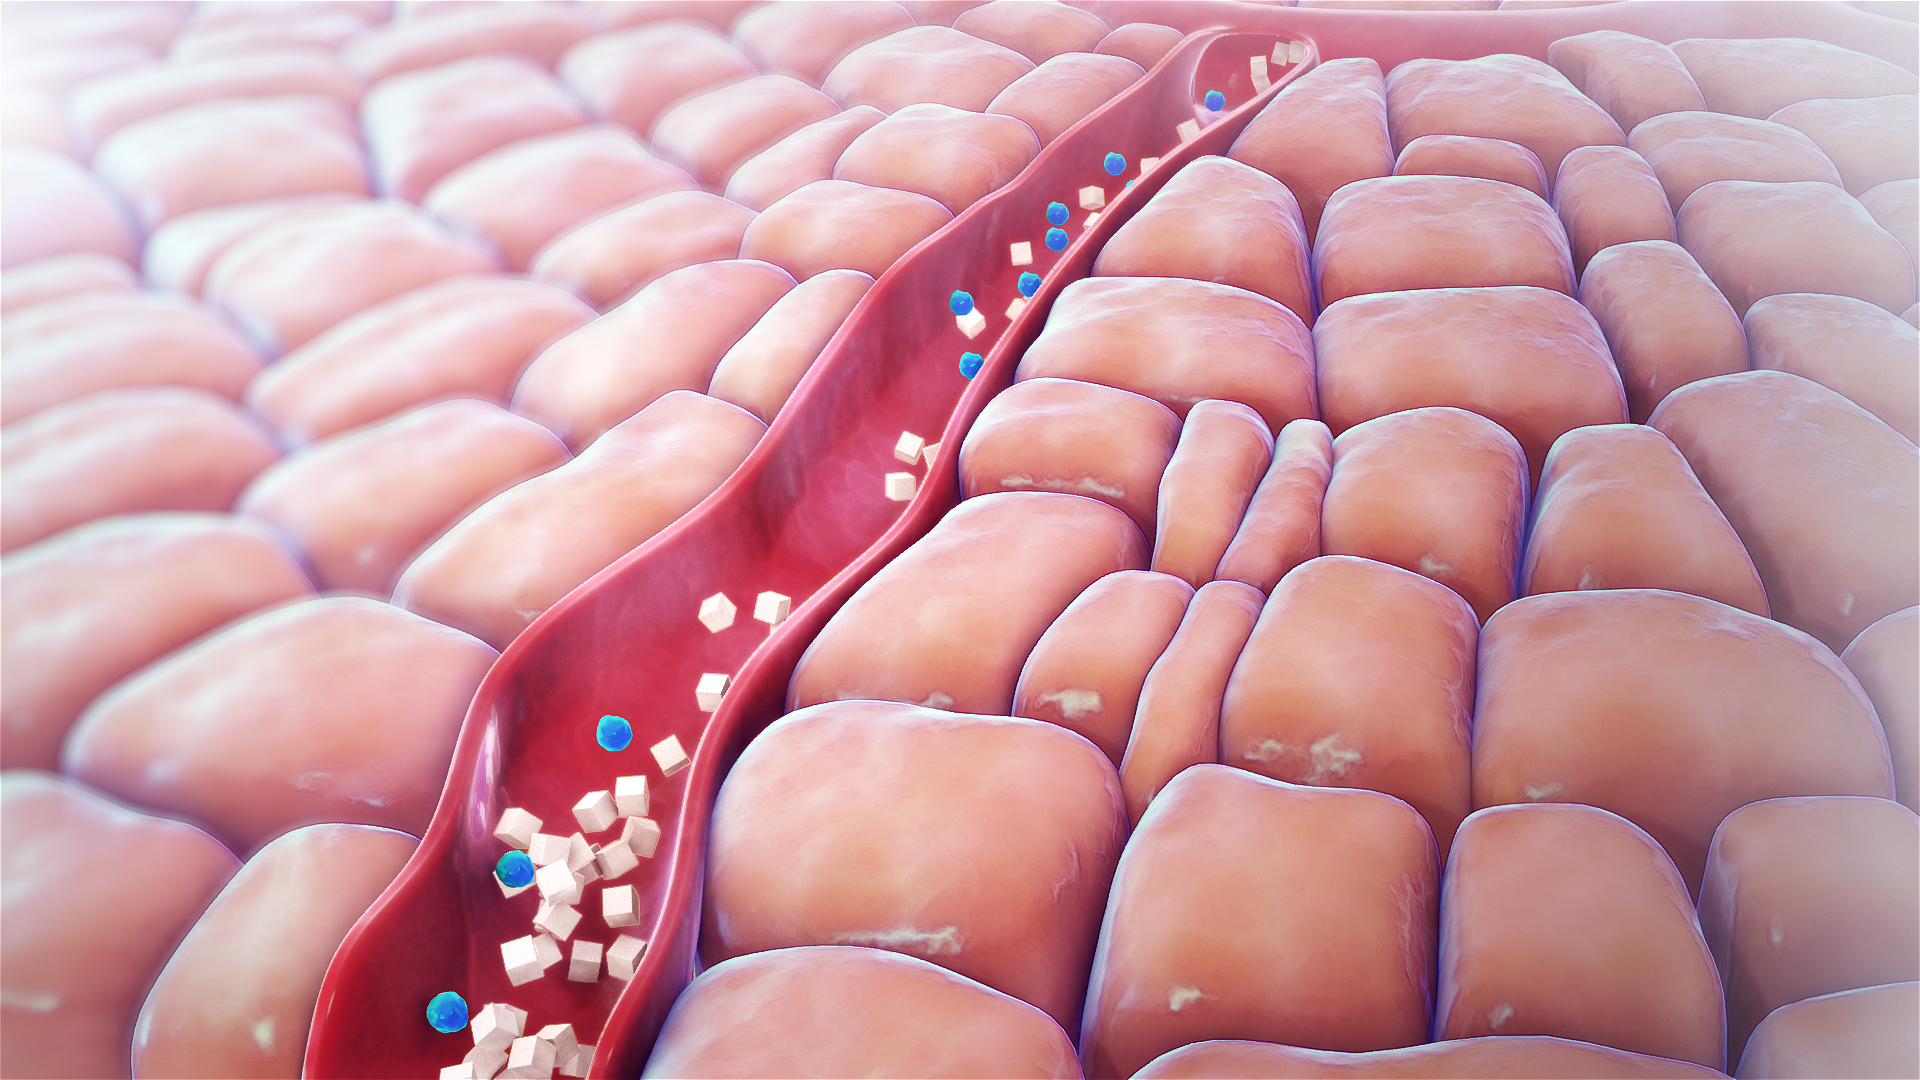 3D Medical Animation still showing Hypoglycemia